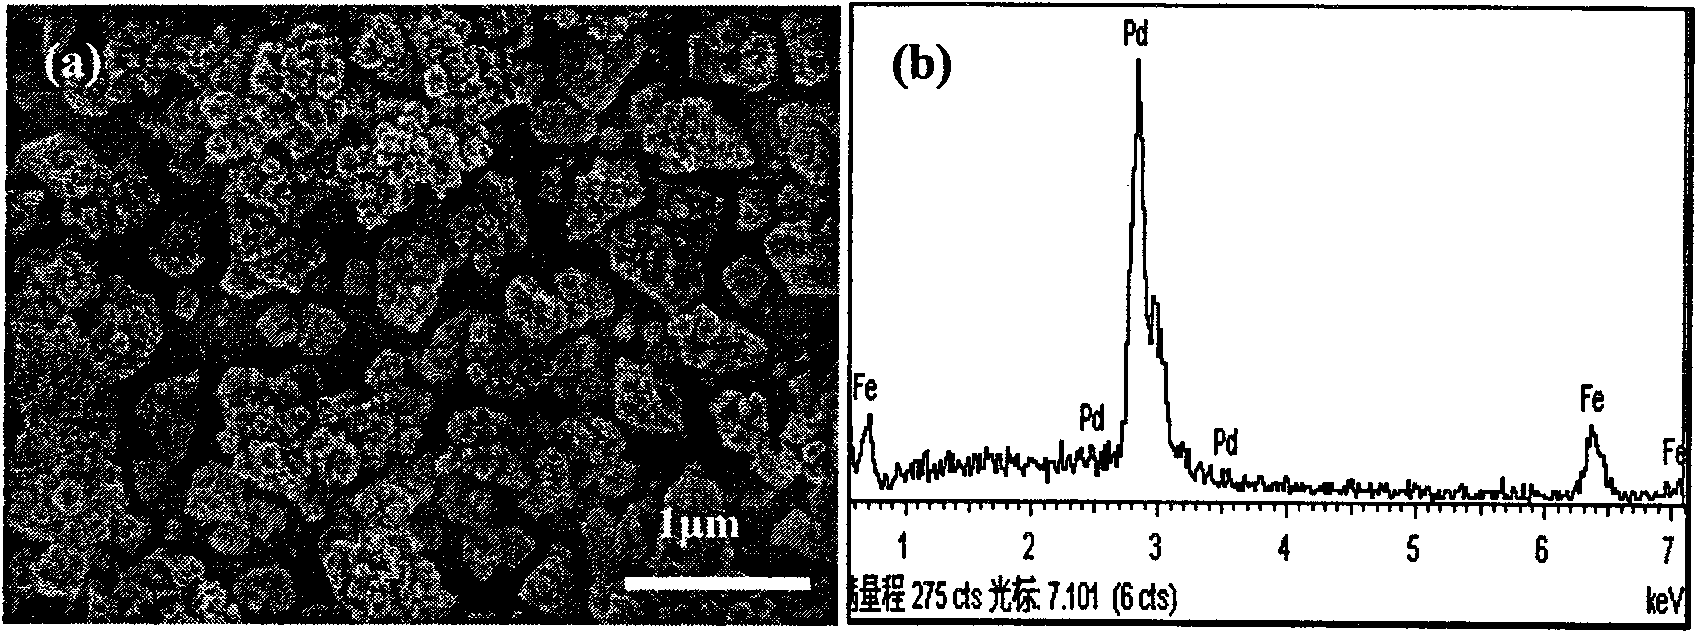 Method for removing chlorine in chlorinated organic pollutant through electrochemistry method